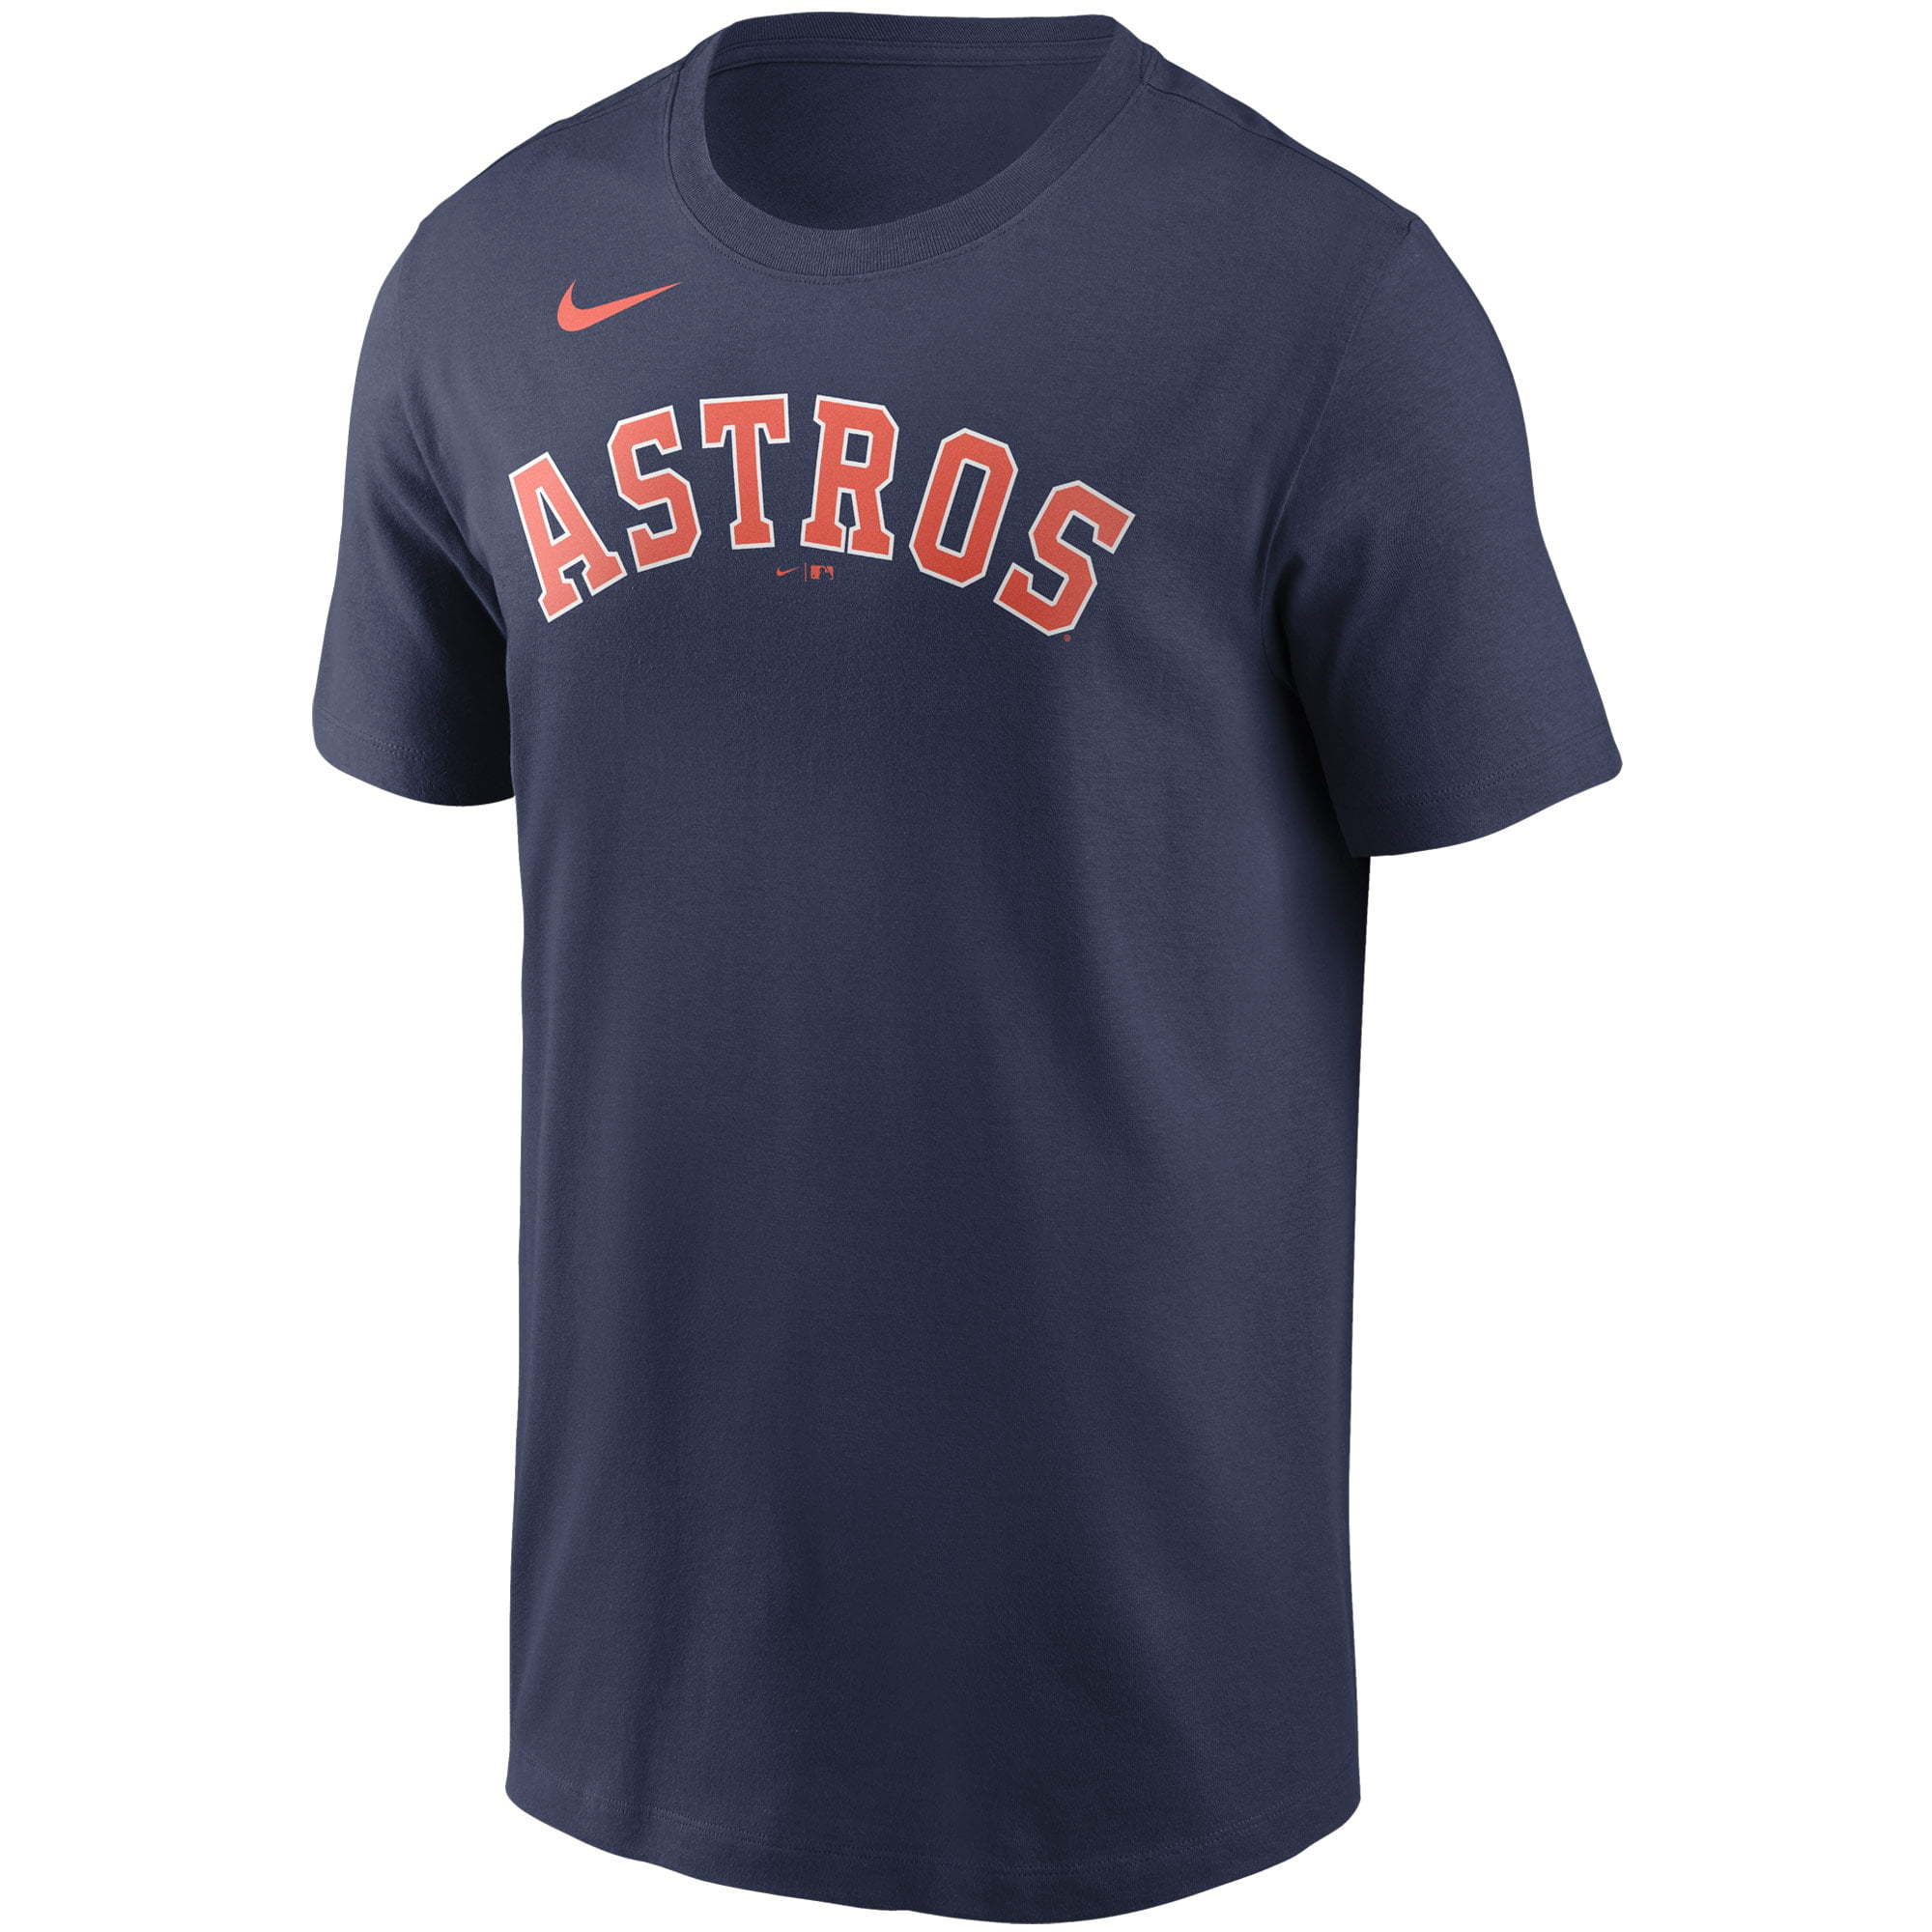 Majestic youth houston astros george springer t-shirt navy-large 14/16 